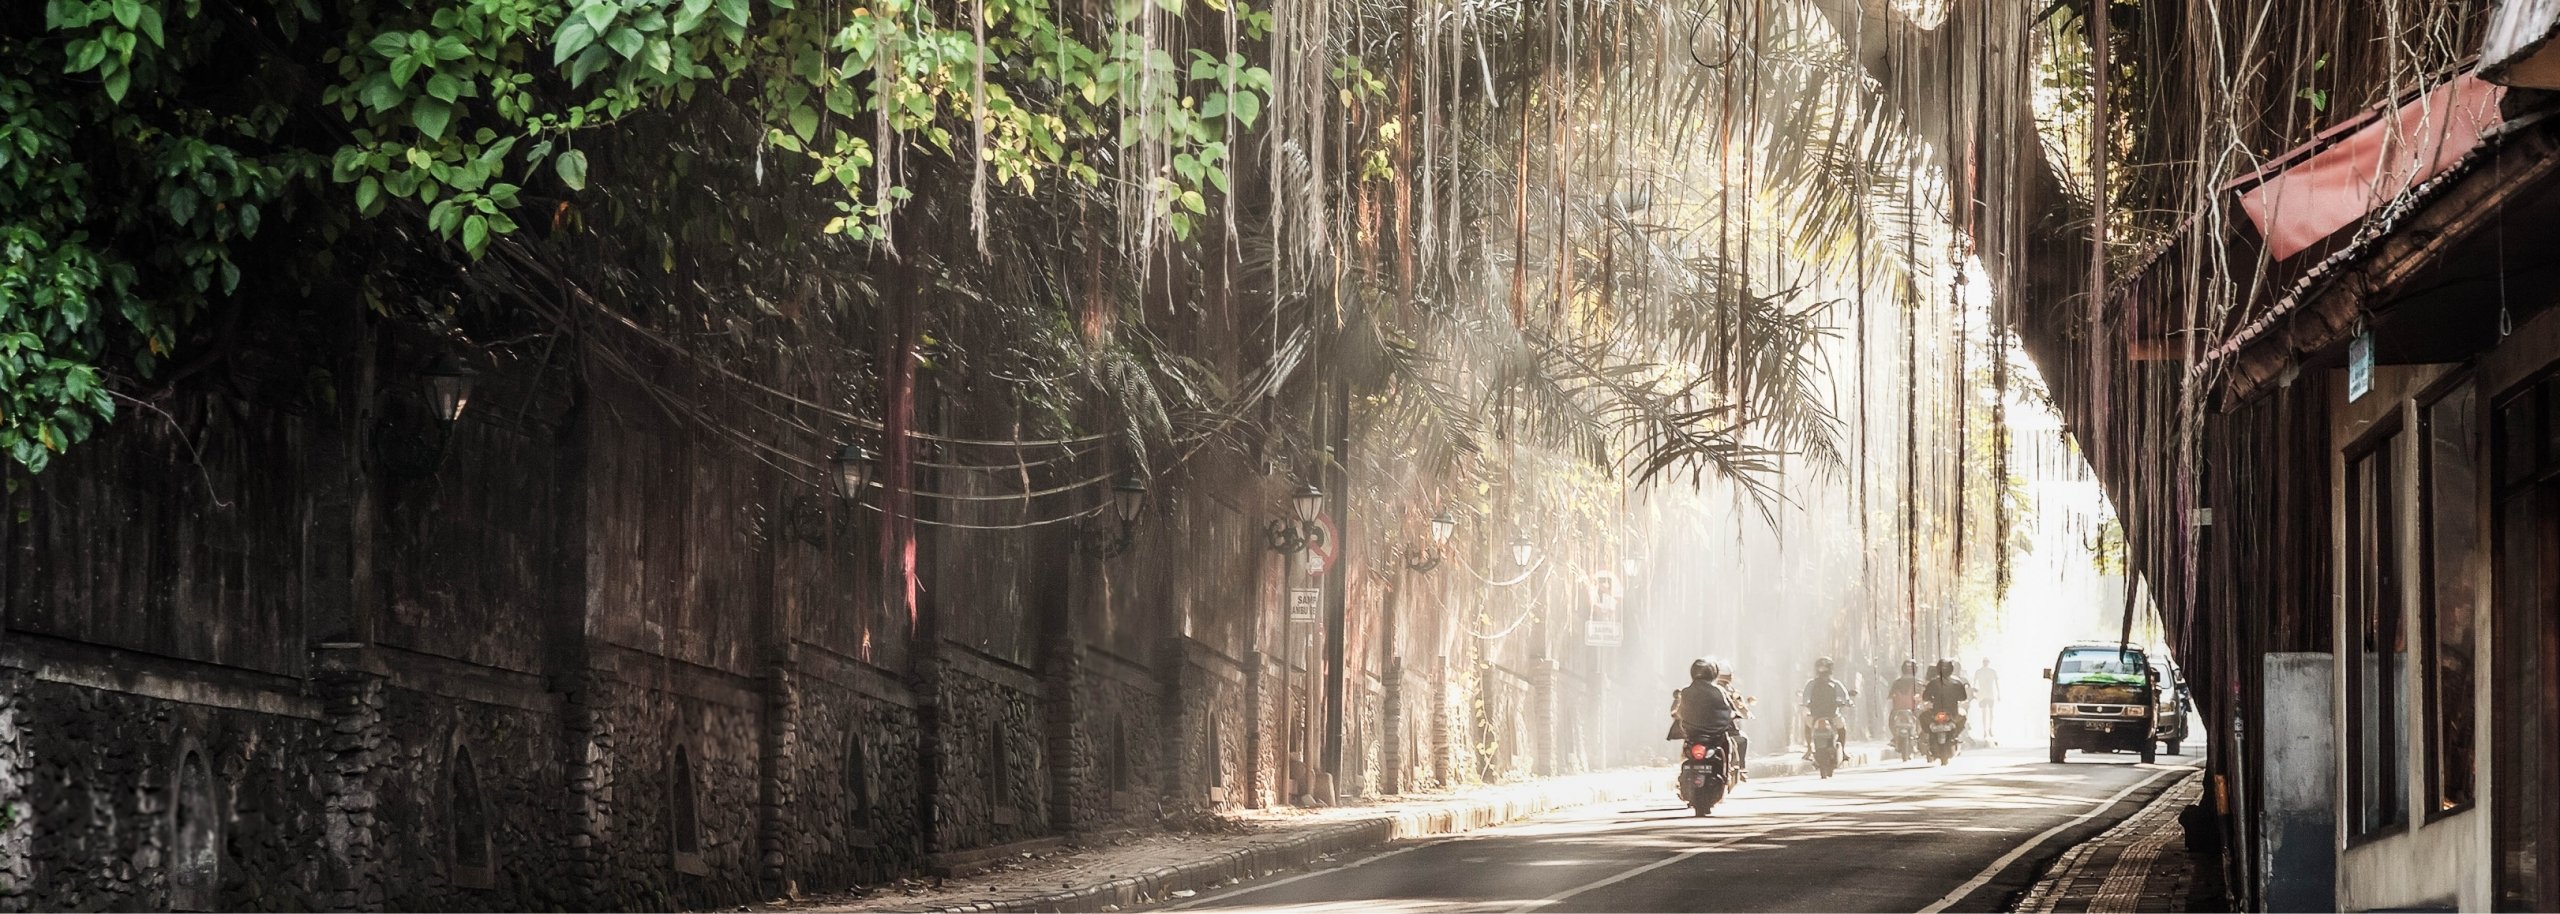 Jungle Street in Bali with Scooters and cars